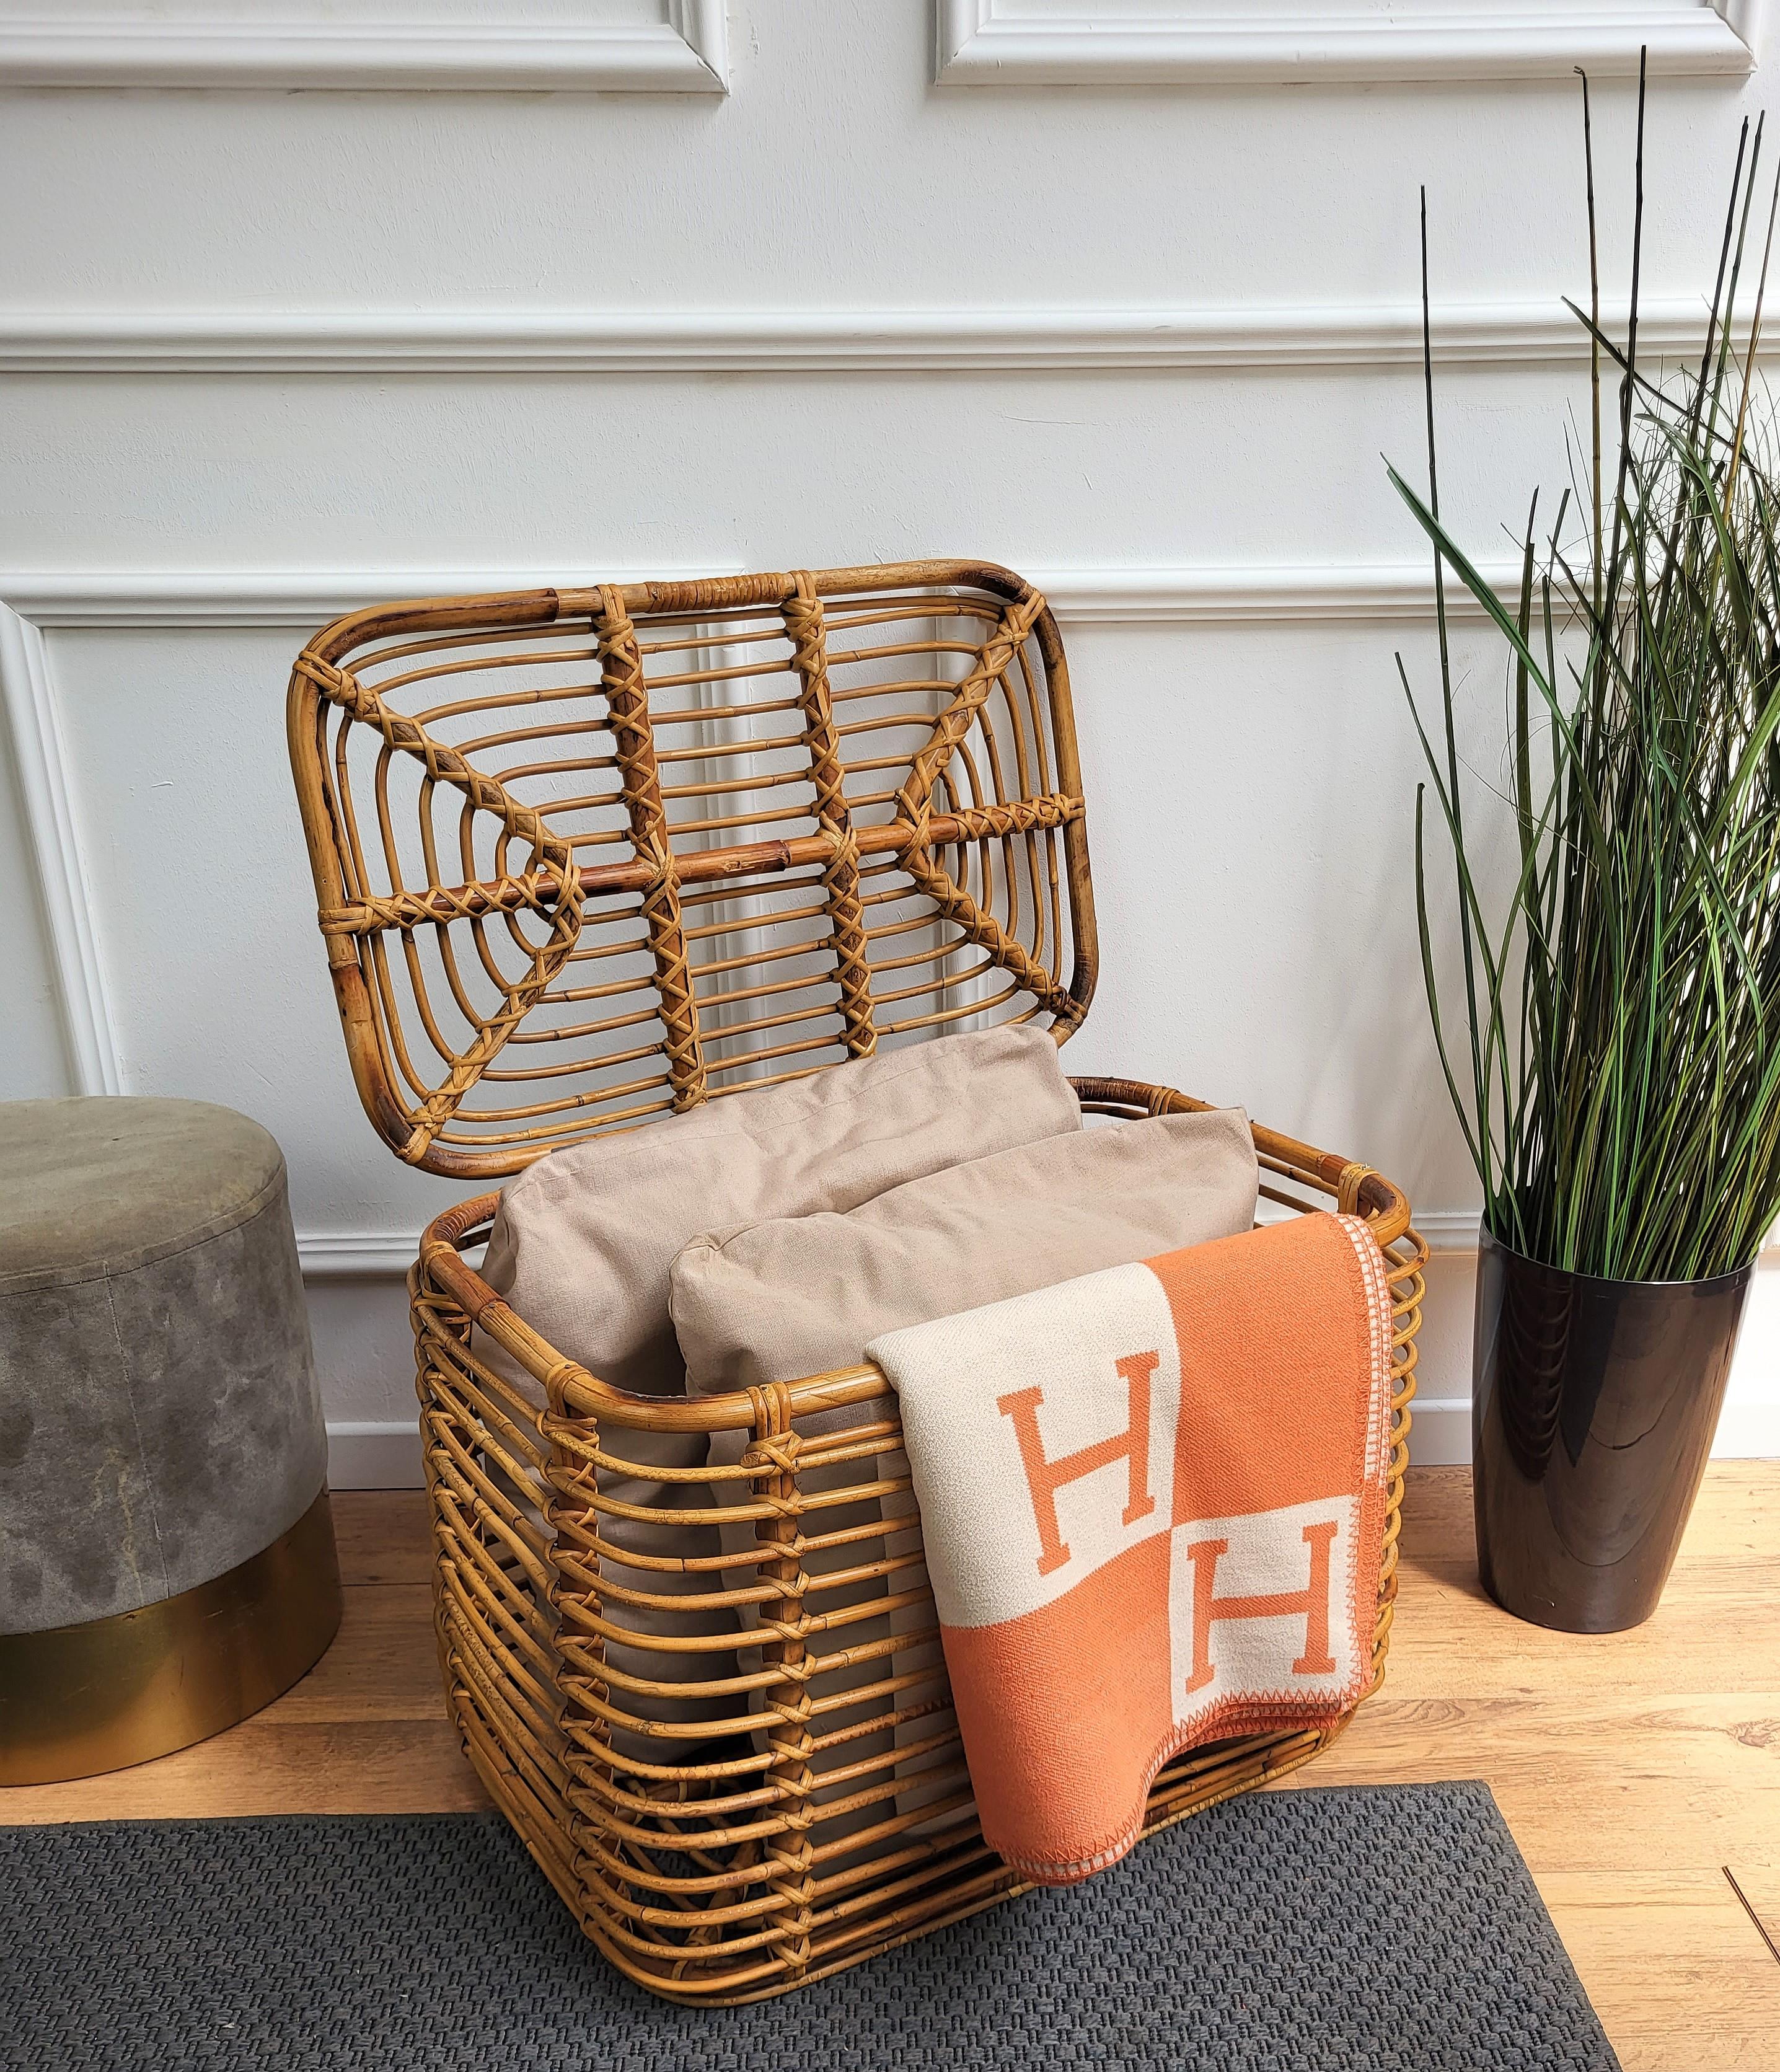 Beautiful 1960s Italian Mid-Century Modern basket or container, perfect in any next to a sofa or in a bedroom as pillow or blanket storage as well as in any bathroom as bathrobe and towels. This charming piece is in the typical style of Audoux and